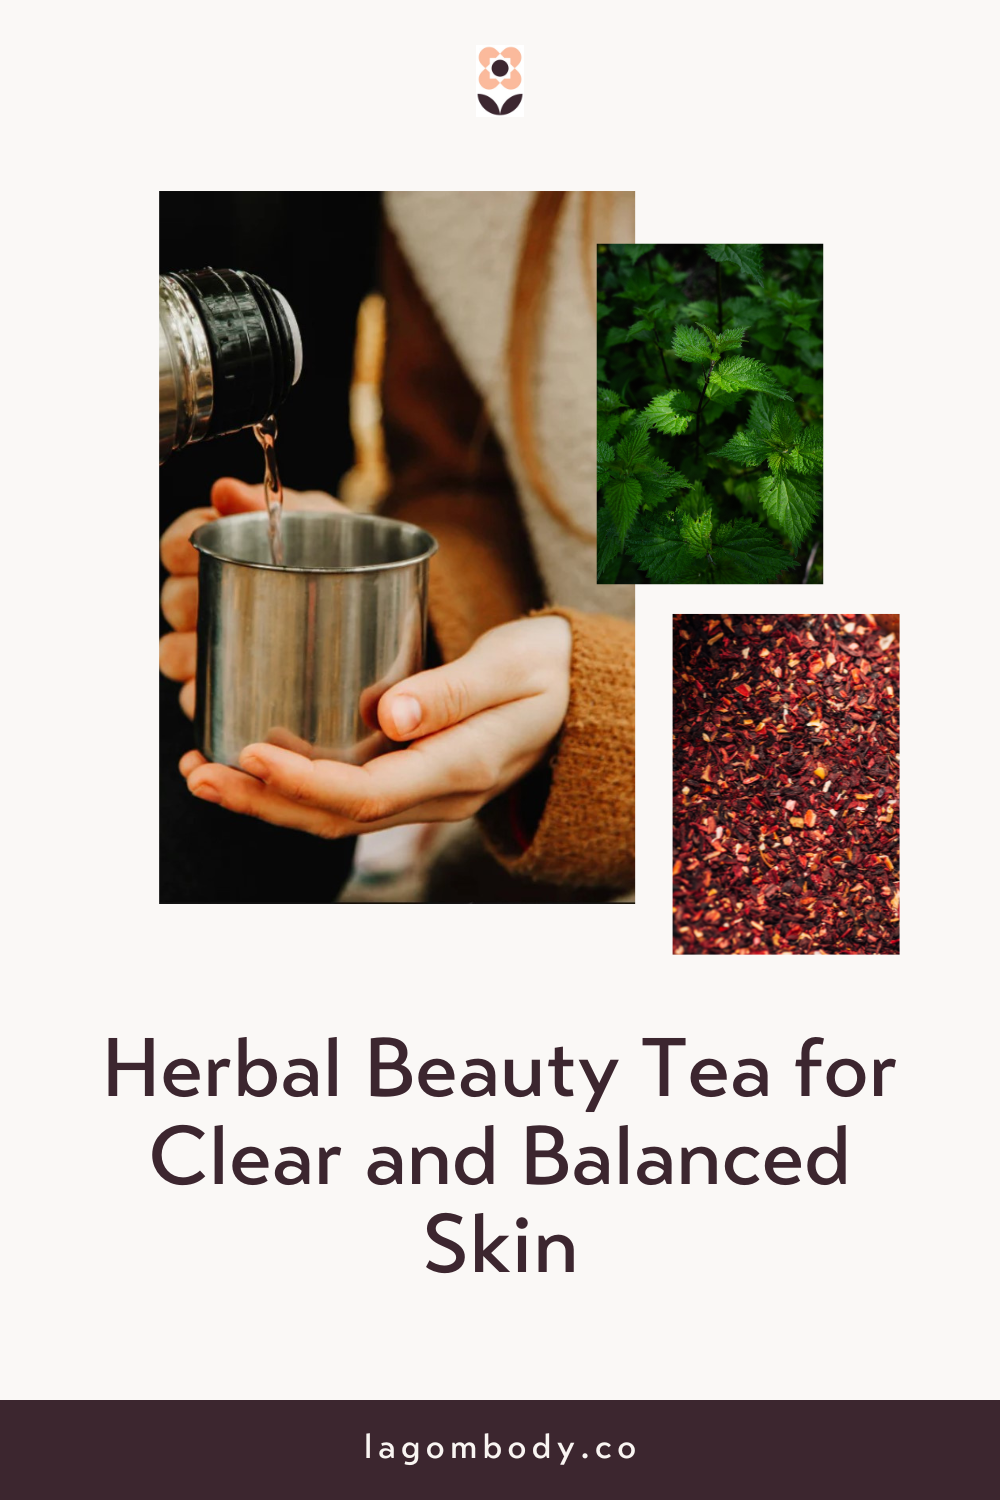 Herbal Beauty Tea for Clear and Balanced Skin